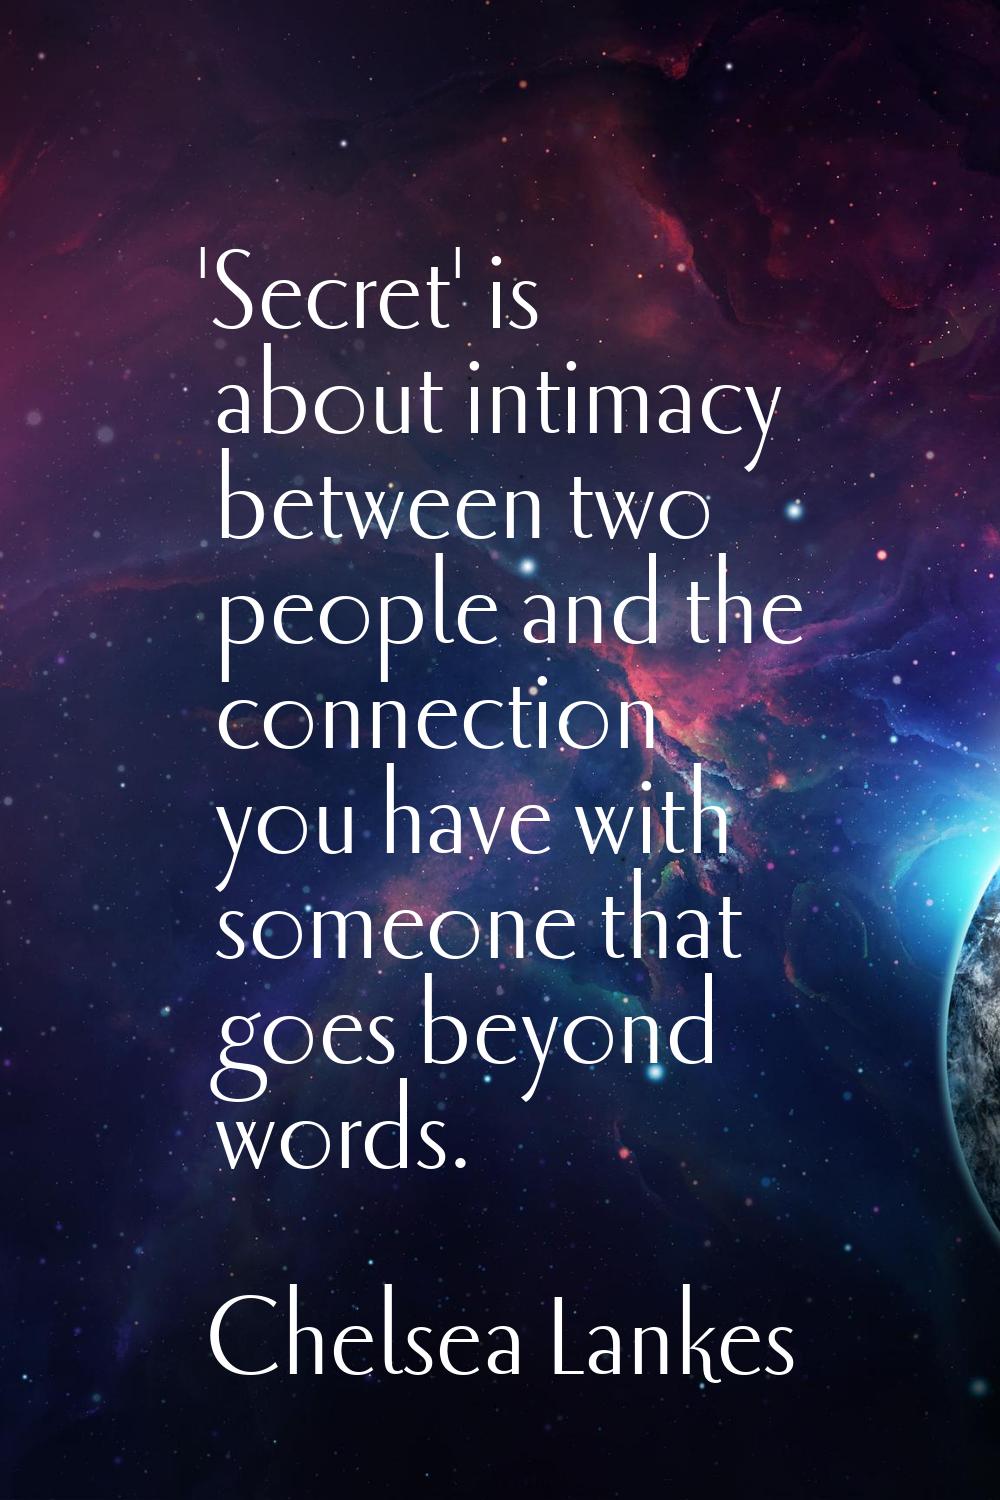 'Secret' is about intimacy between two people and the connection you have with someone that goes be